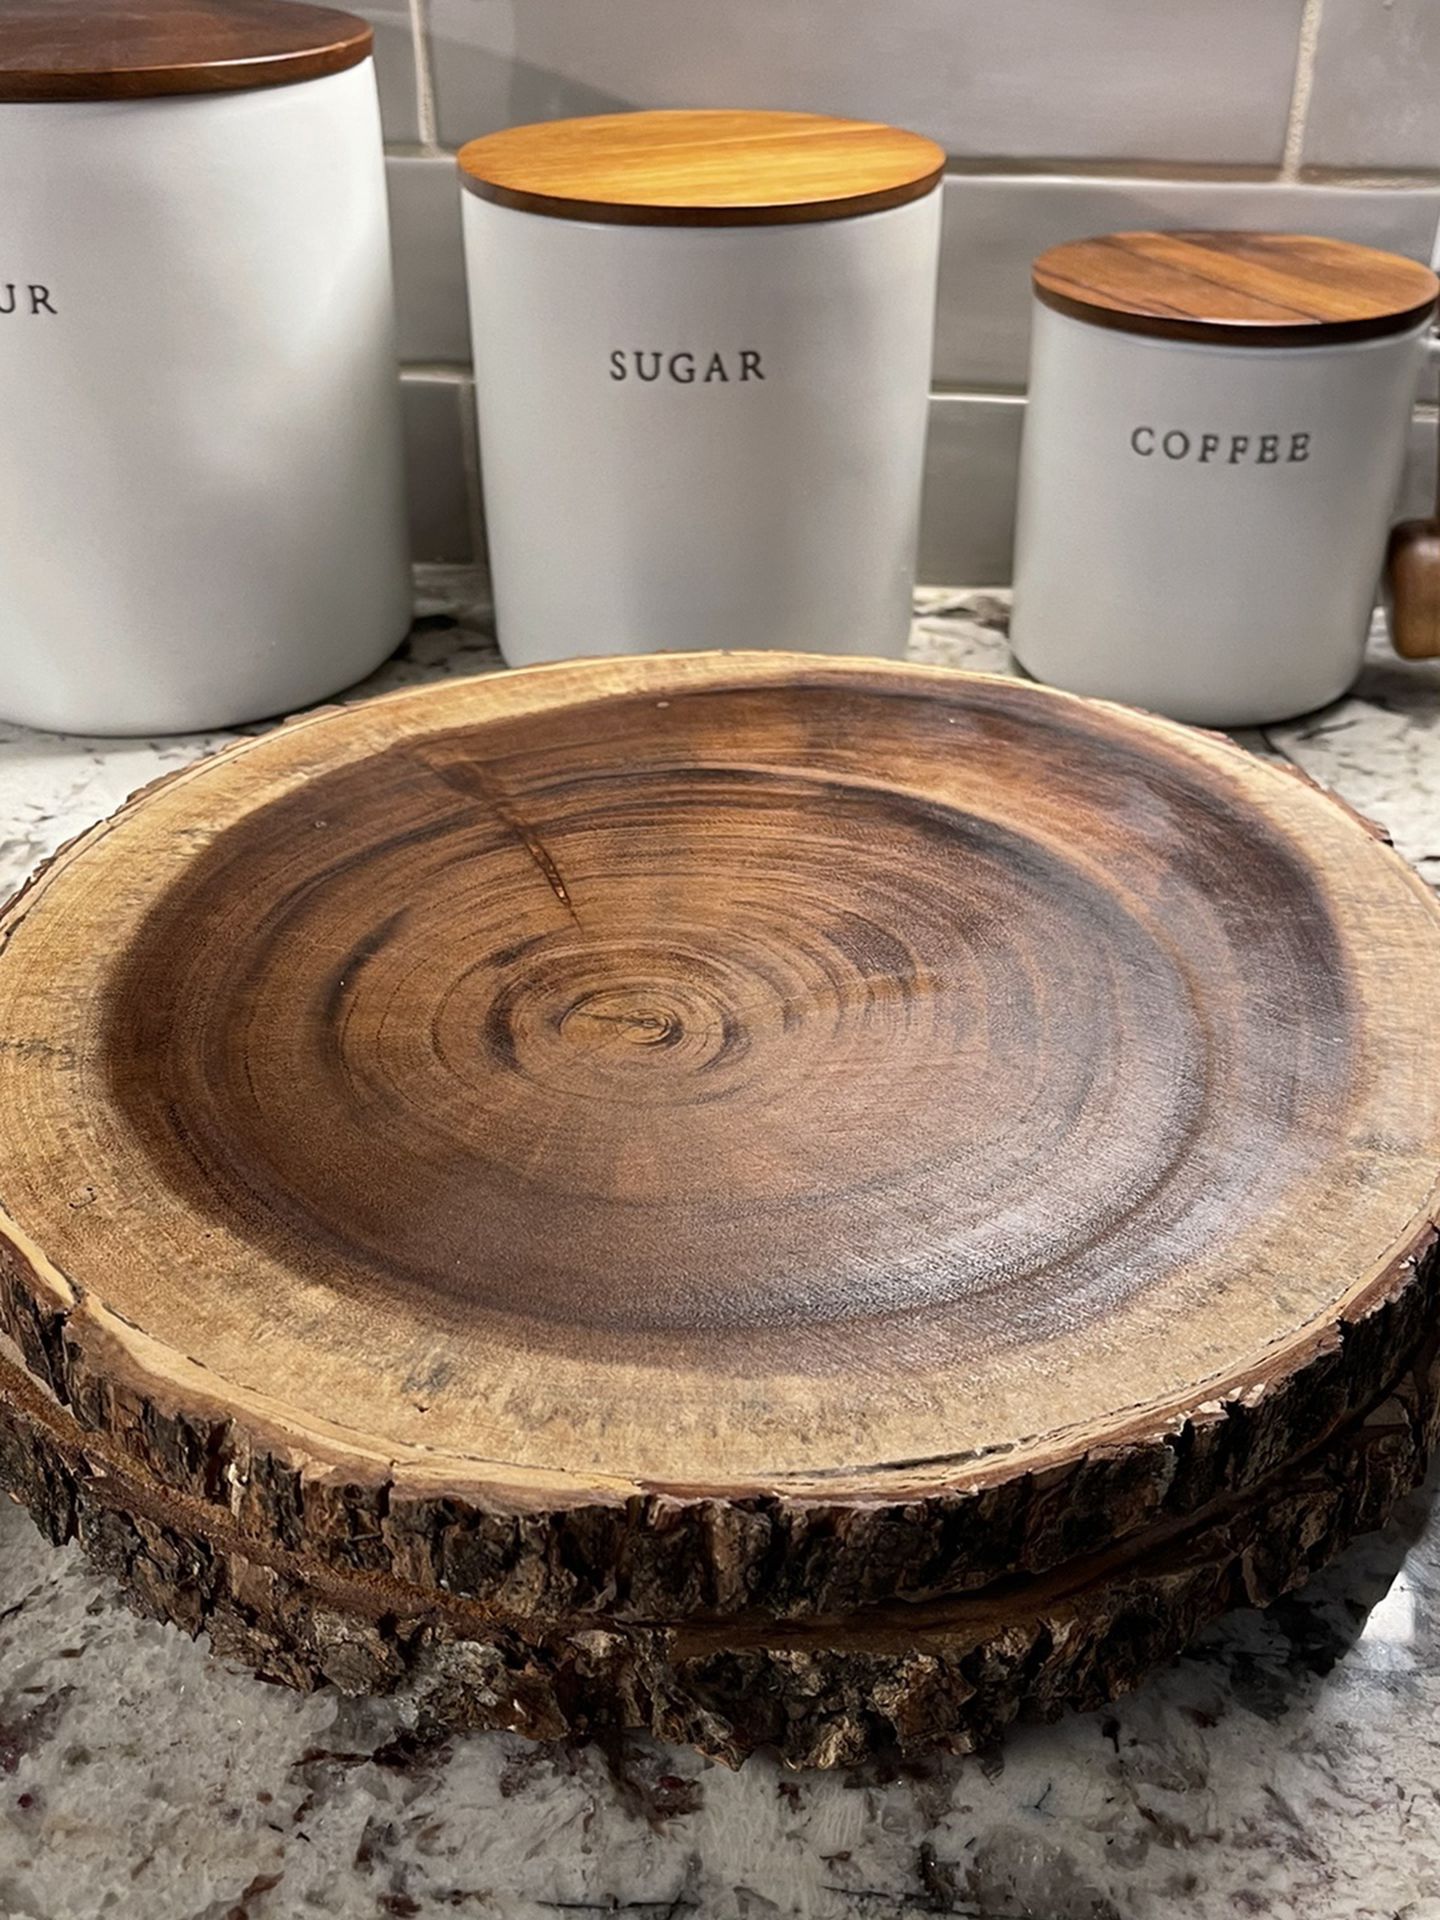 2 13” Inch Wooden Cake Stands For Wedding/baby shower/event